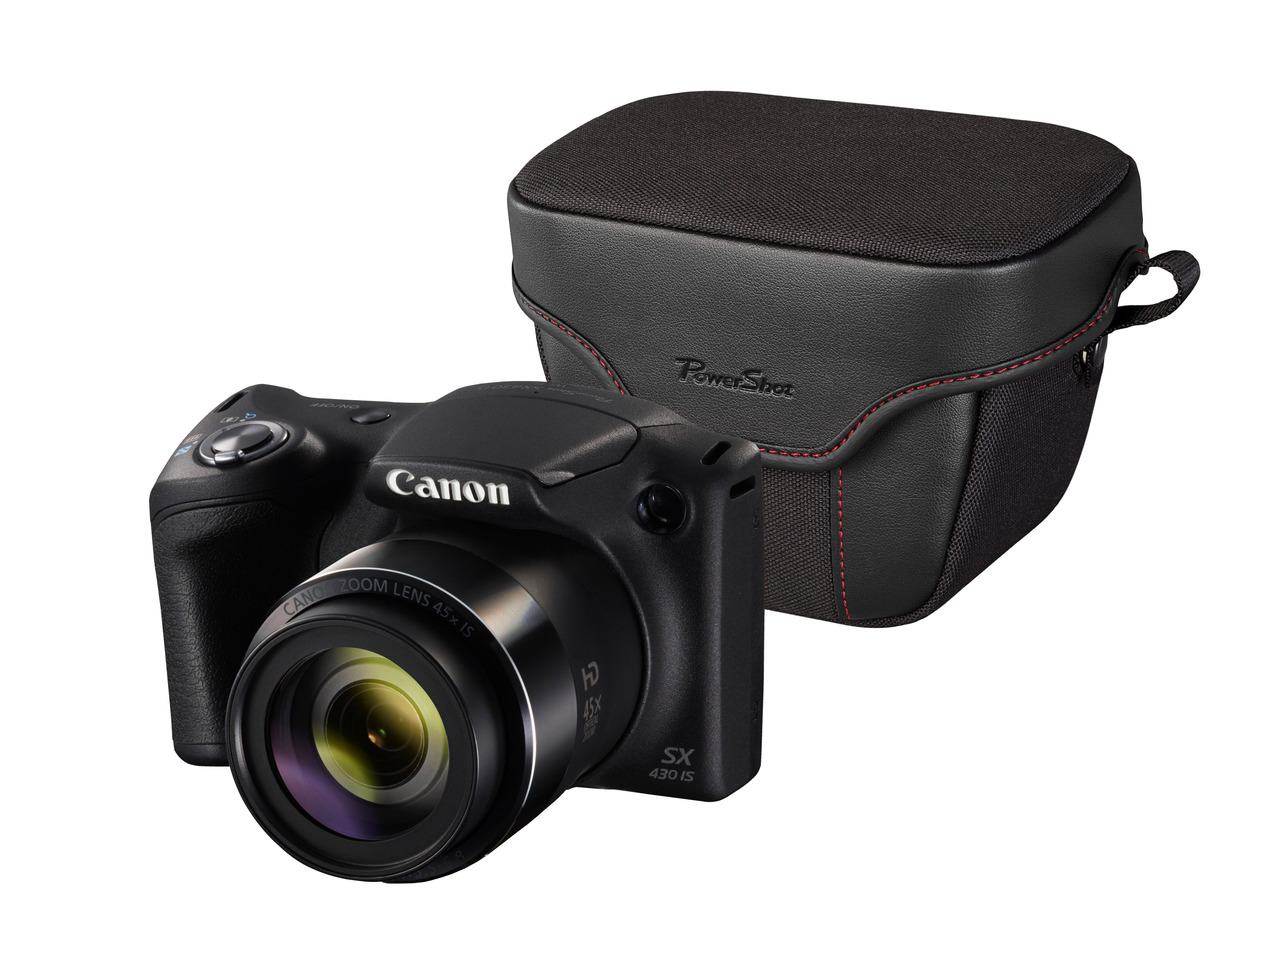 CANON Camera Power Shot SX420 IS with DXX-950 Soft Case Included - Lidl